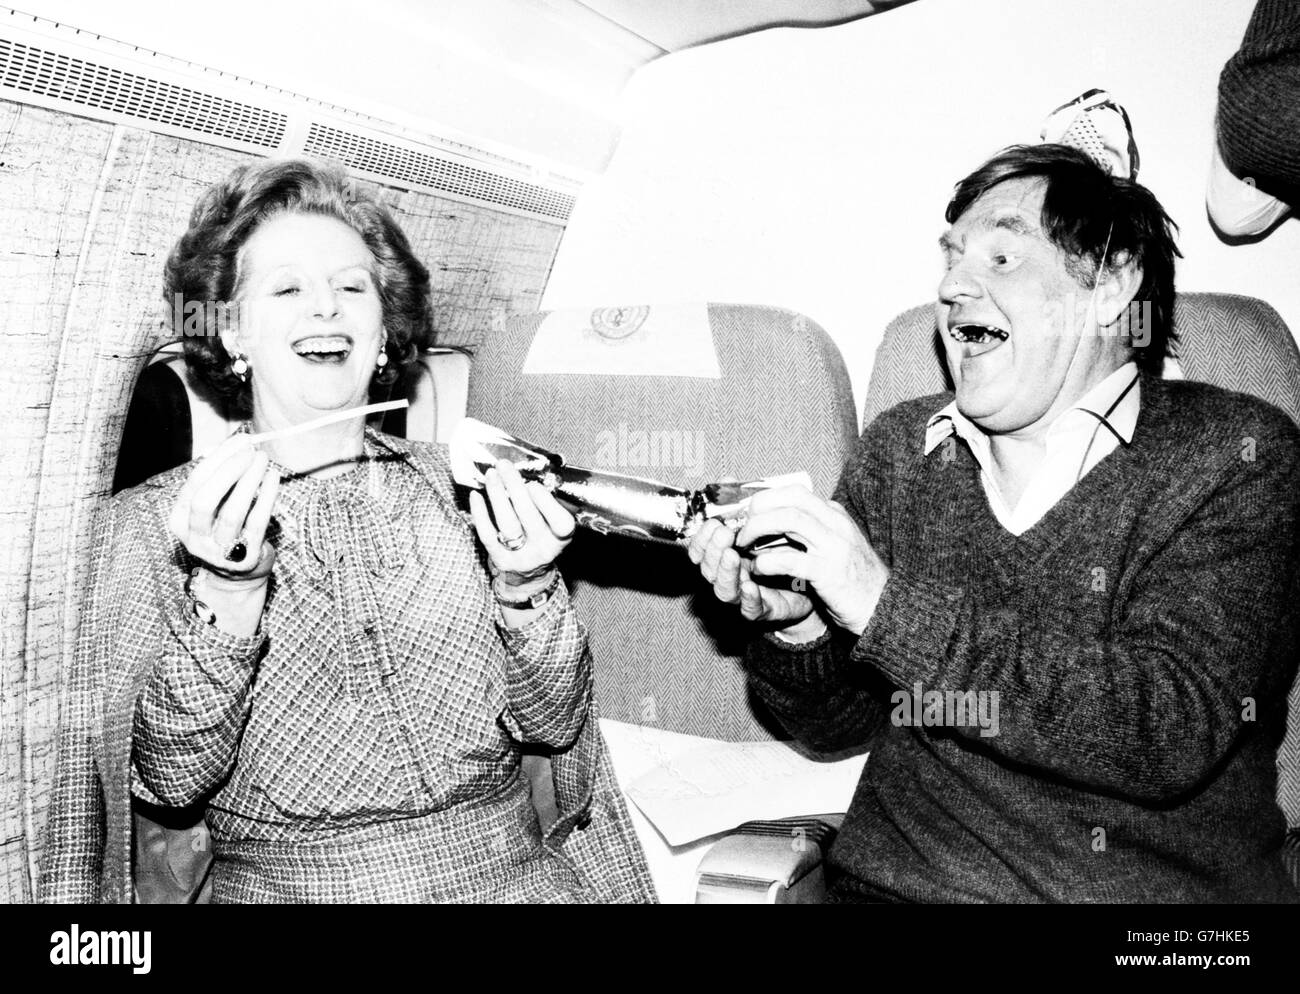 Prime Minister Margaret Thatcher pulls a Christmas cracker with her Chief Press Officer Bernard Ingham on the VC-10 taking her from Washington to London. It was the last leg of her round-the-world diplomatic trip. Stock Photo